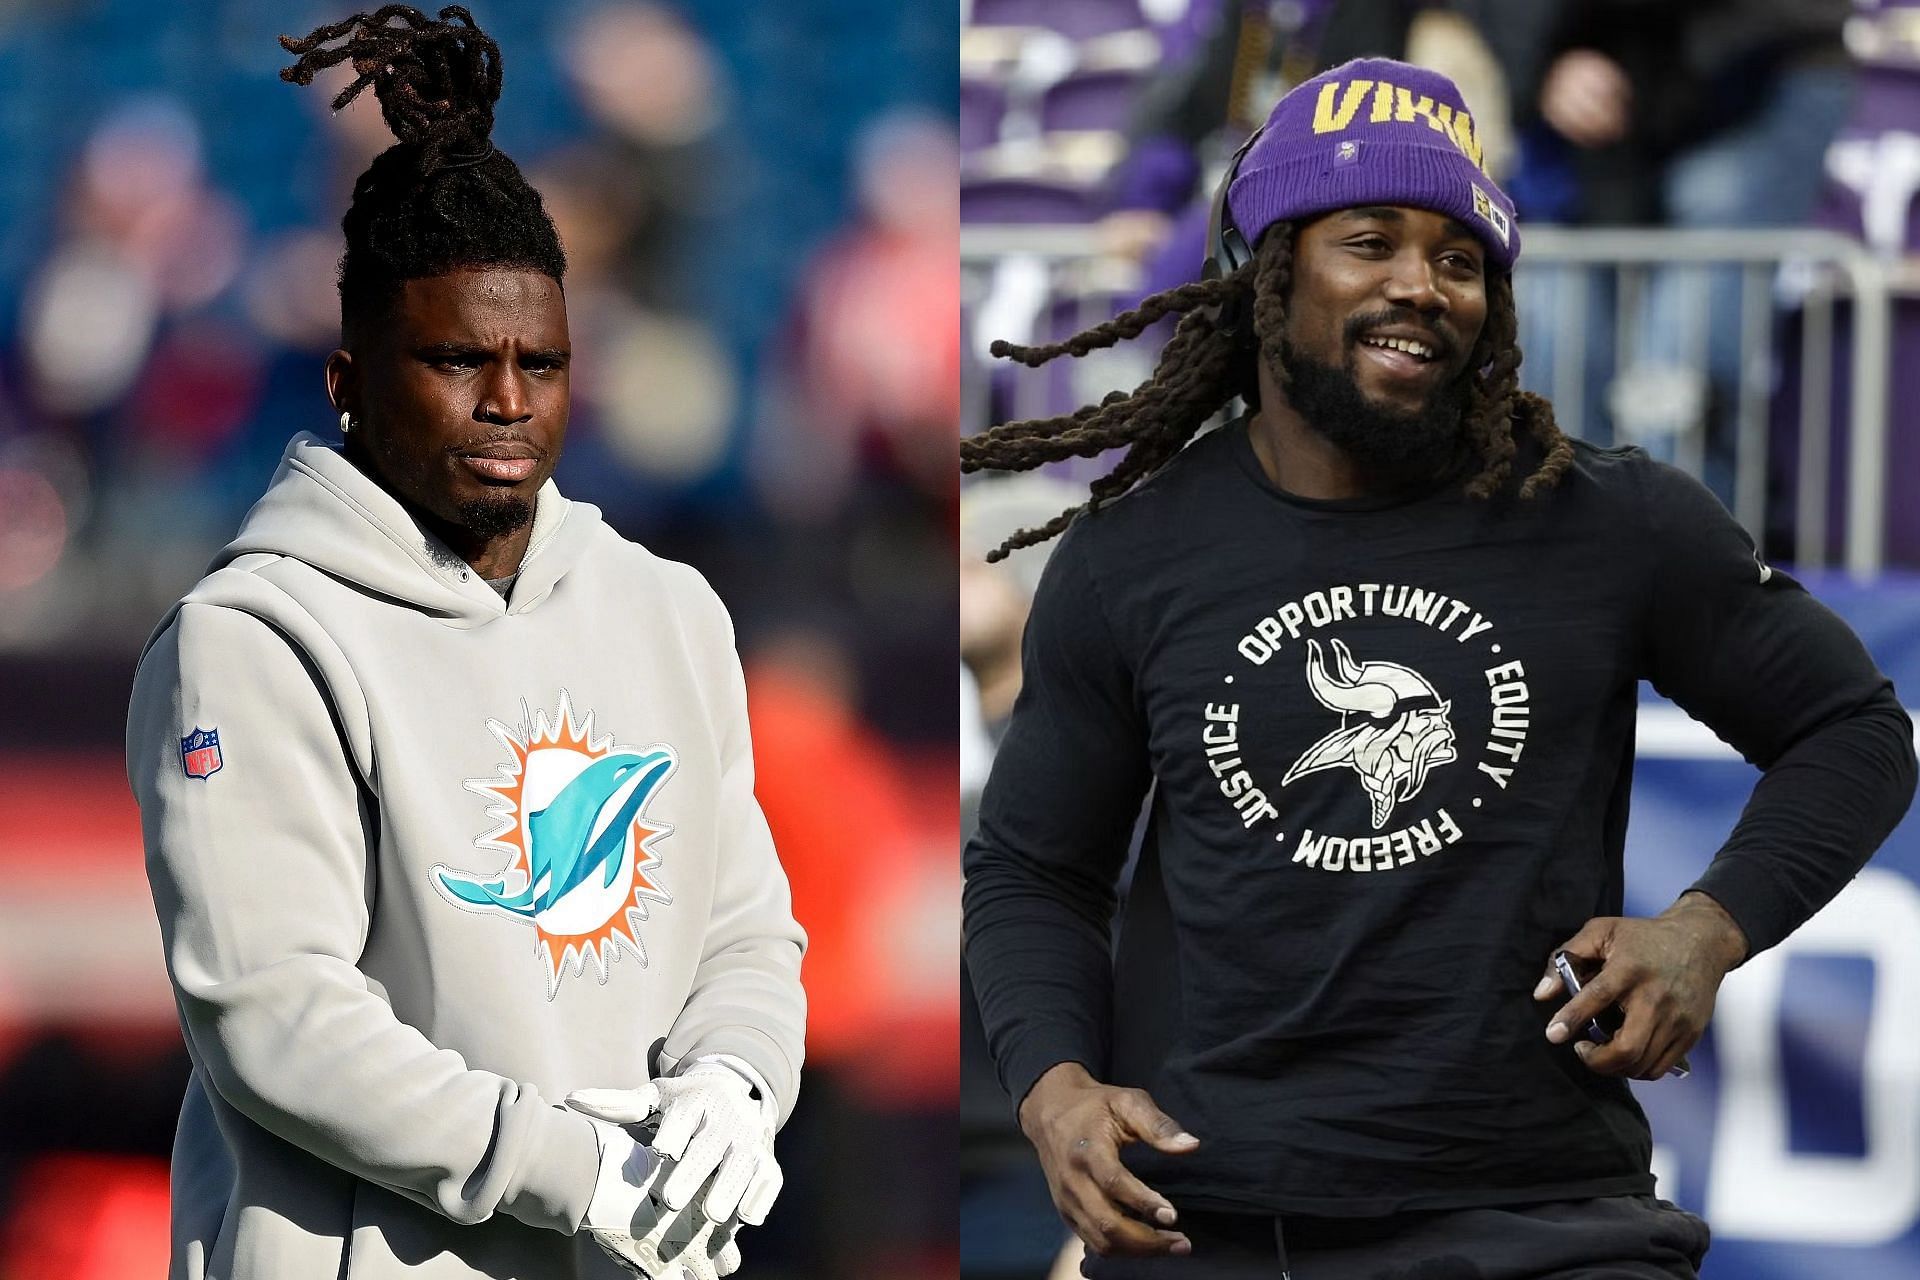 Tyreek Hill joins Dalvin Cook recruitment tour amid RB